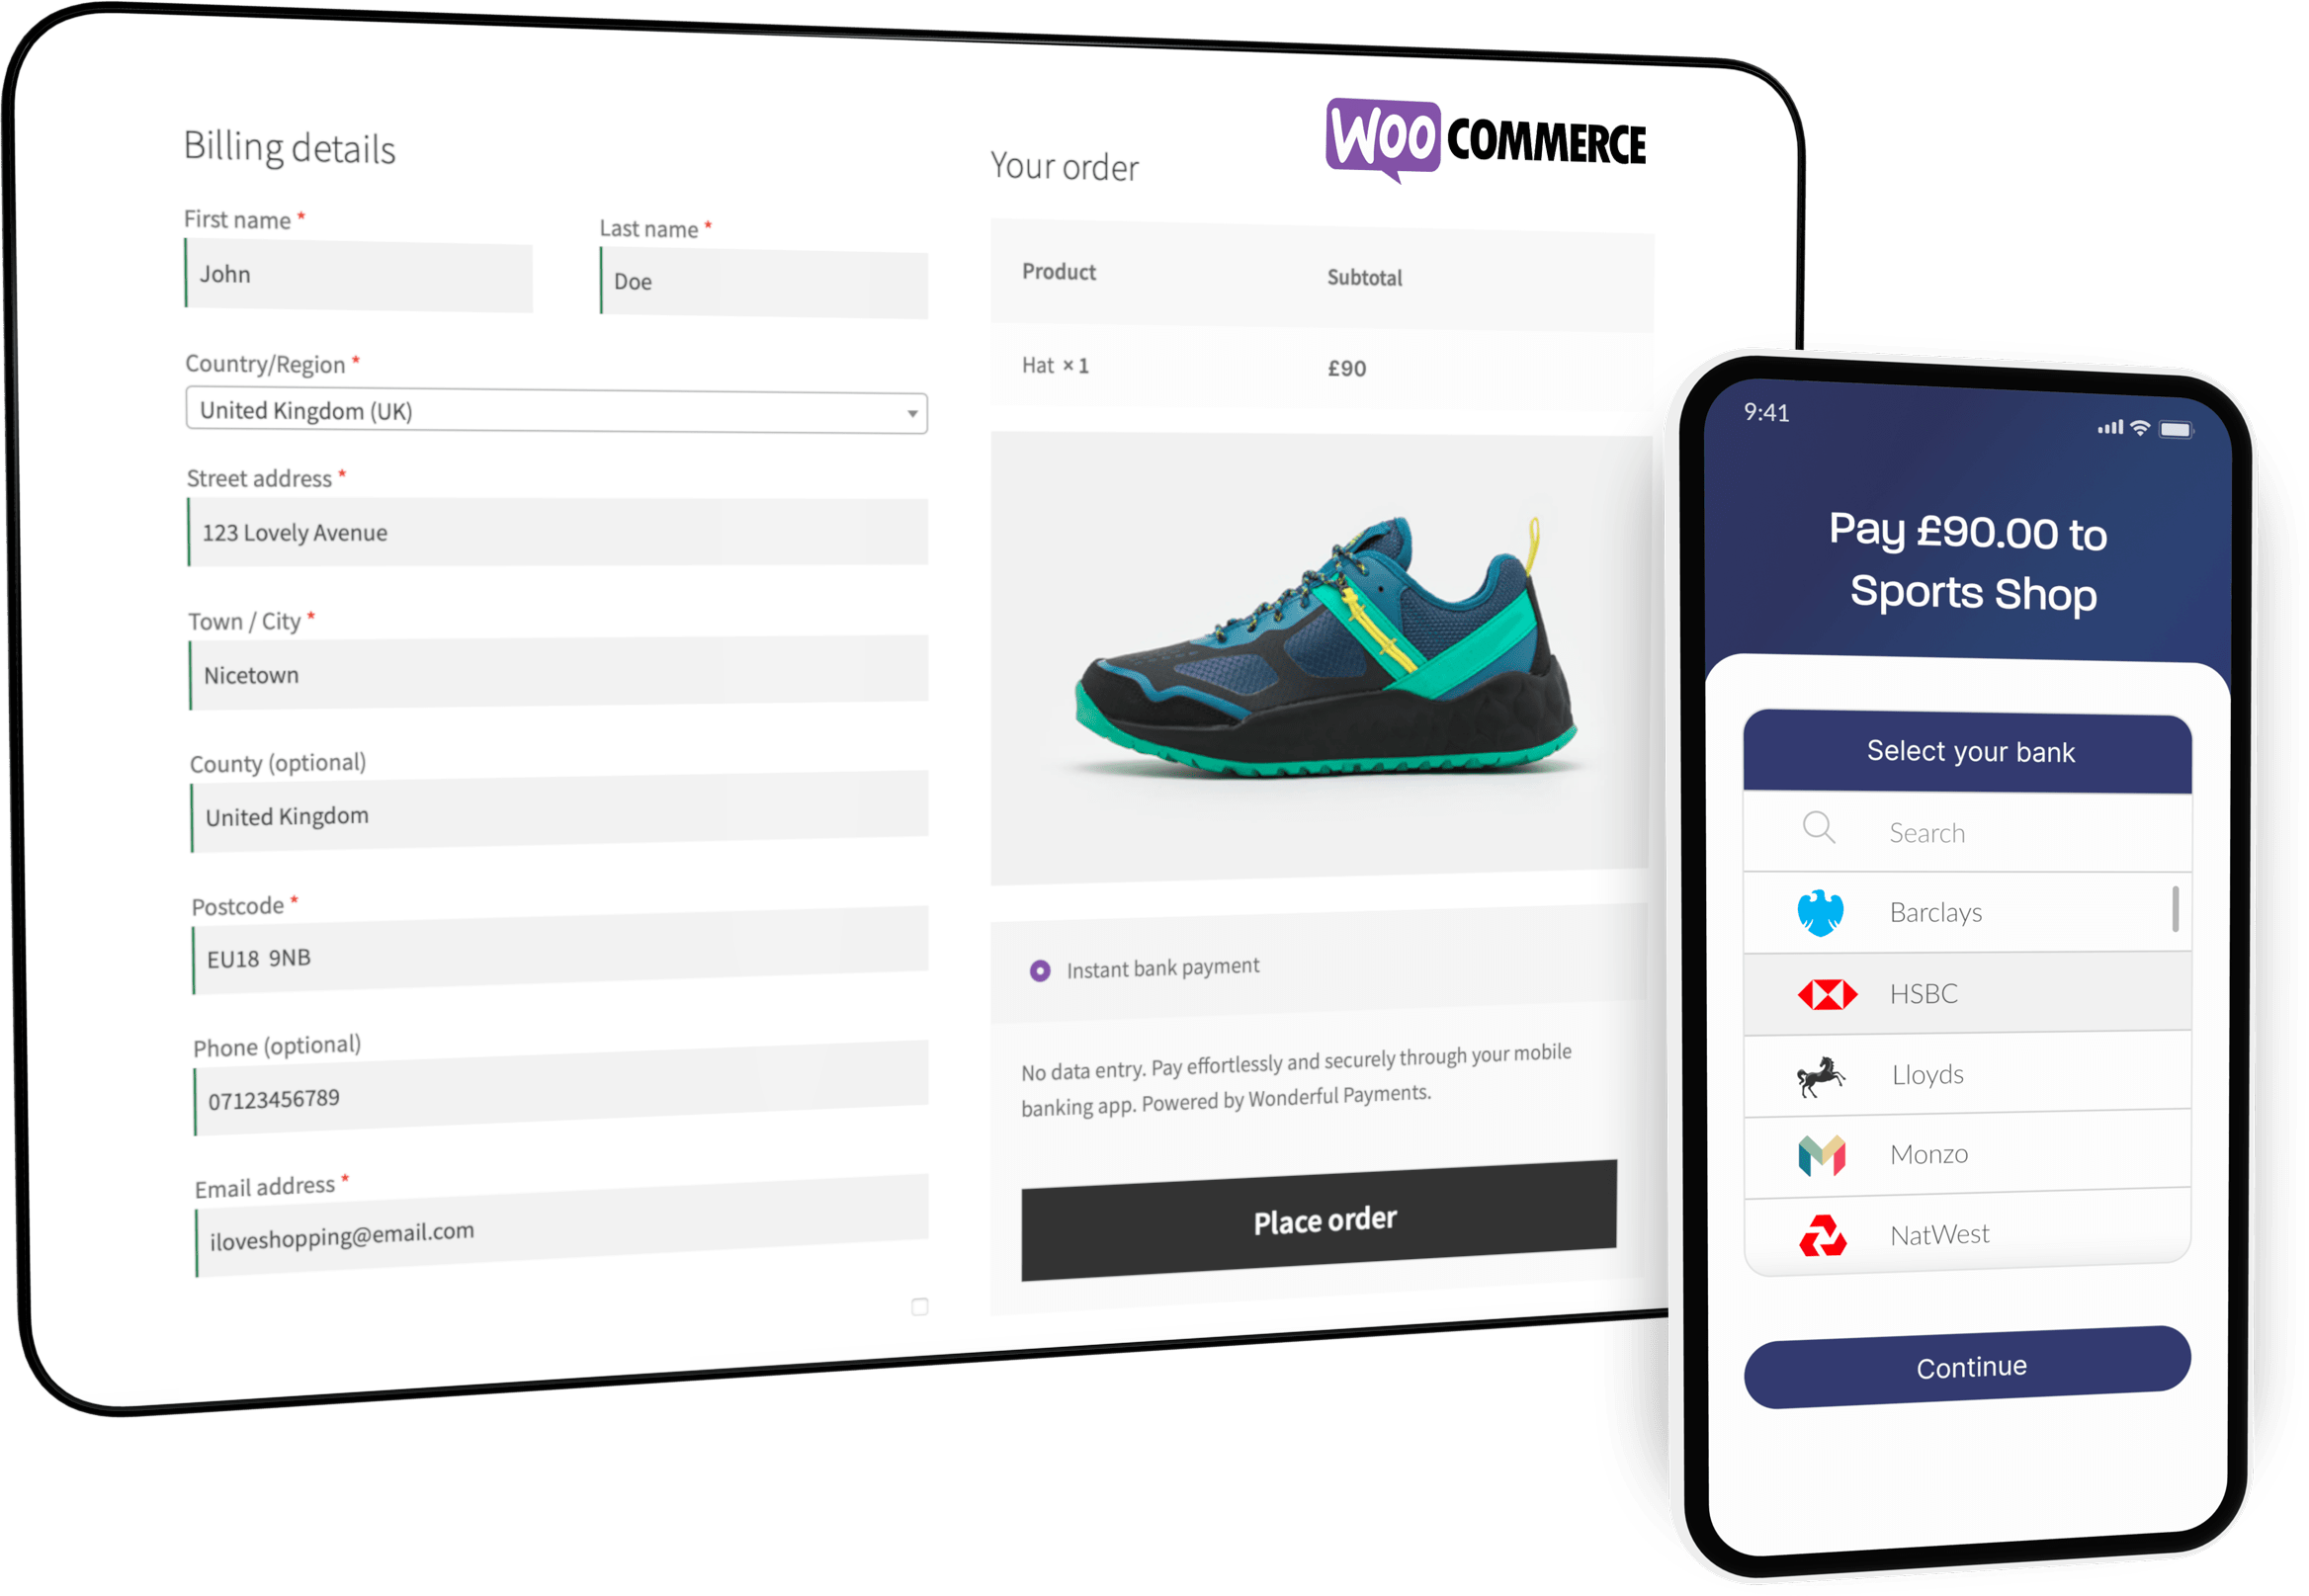 Ecommerce with Wonderful Payments